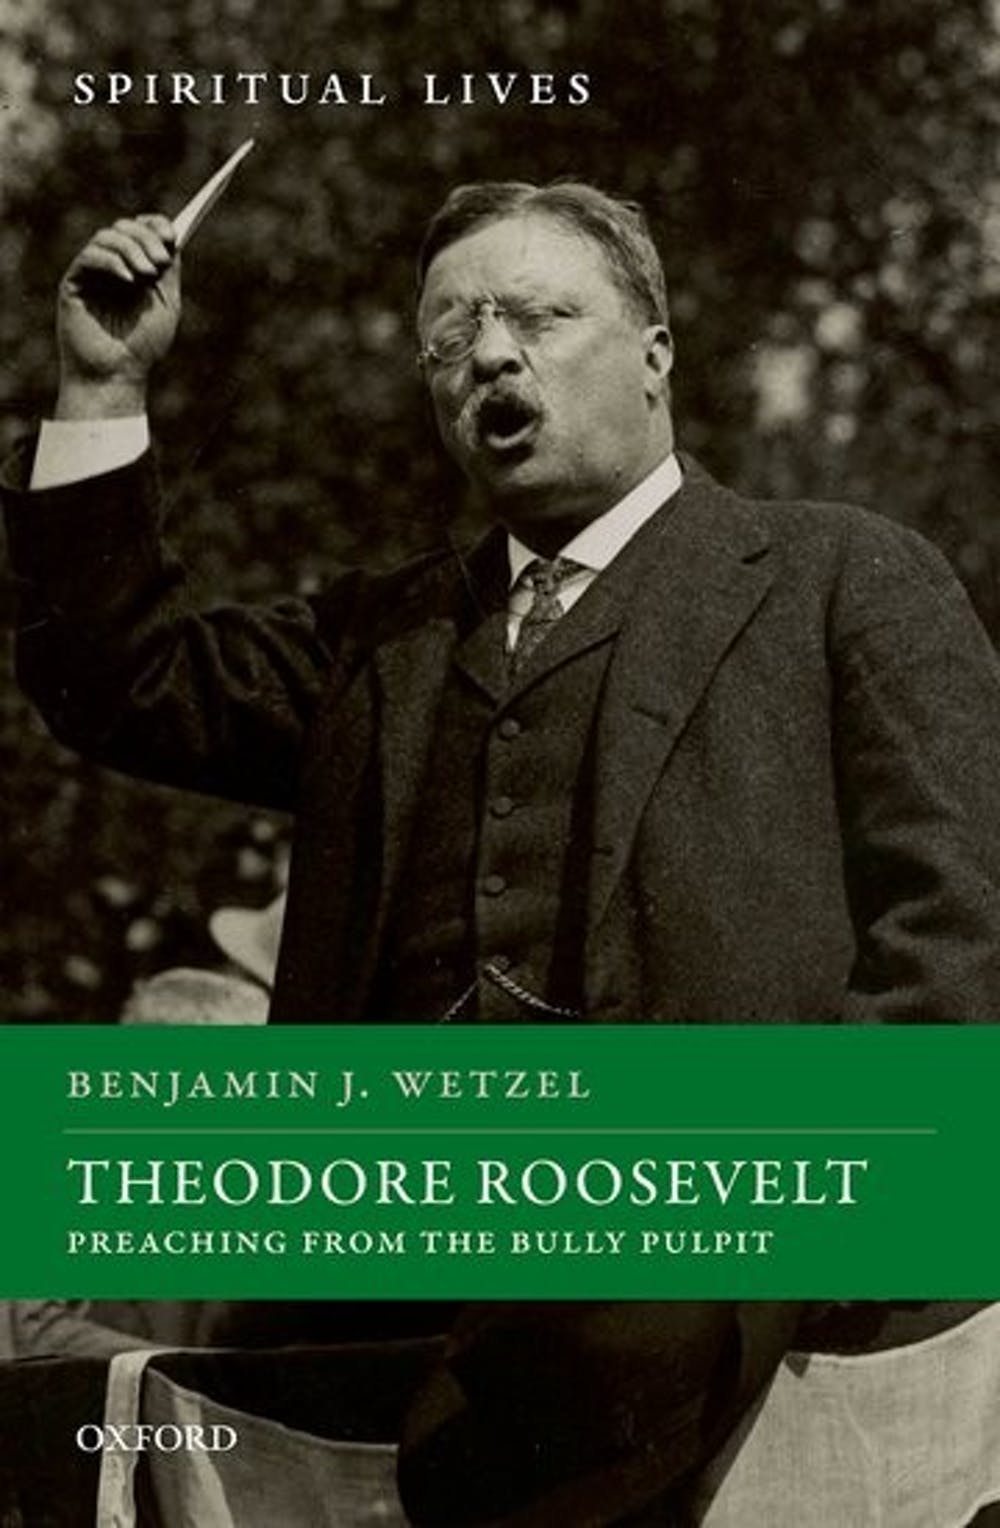 Theodore Roosevelt: Preaching from the Bully Pulpit